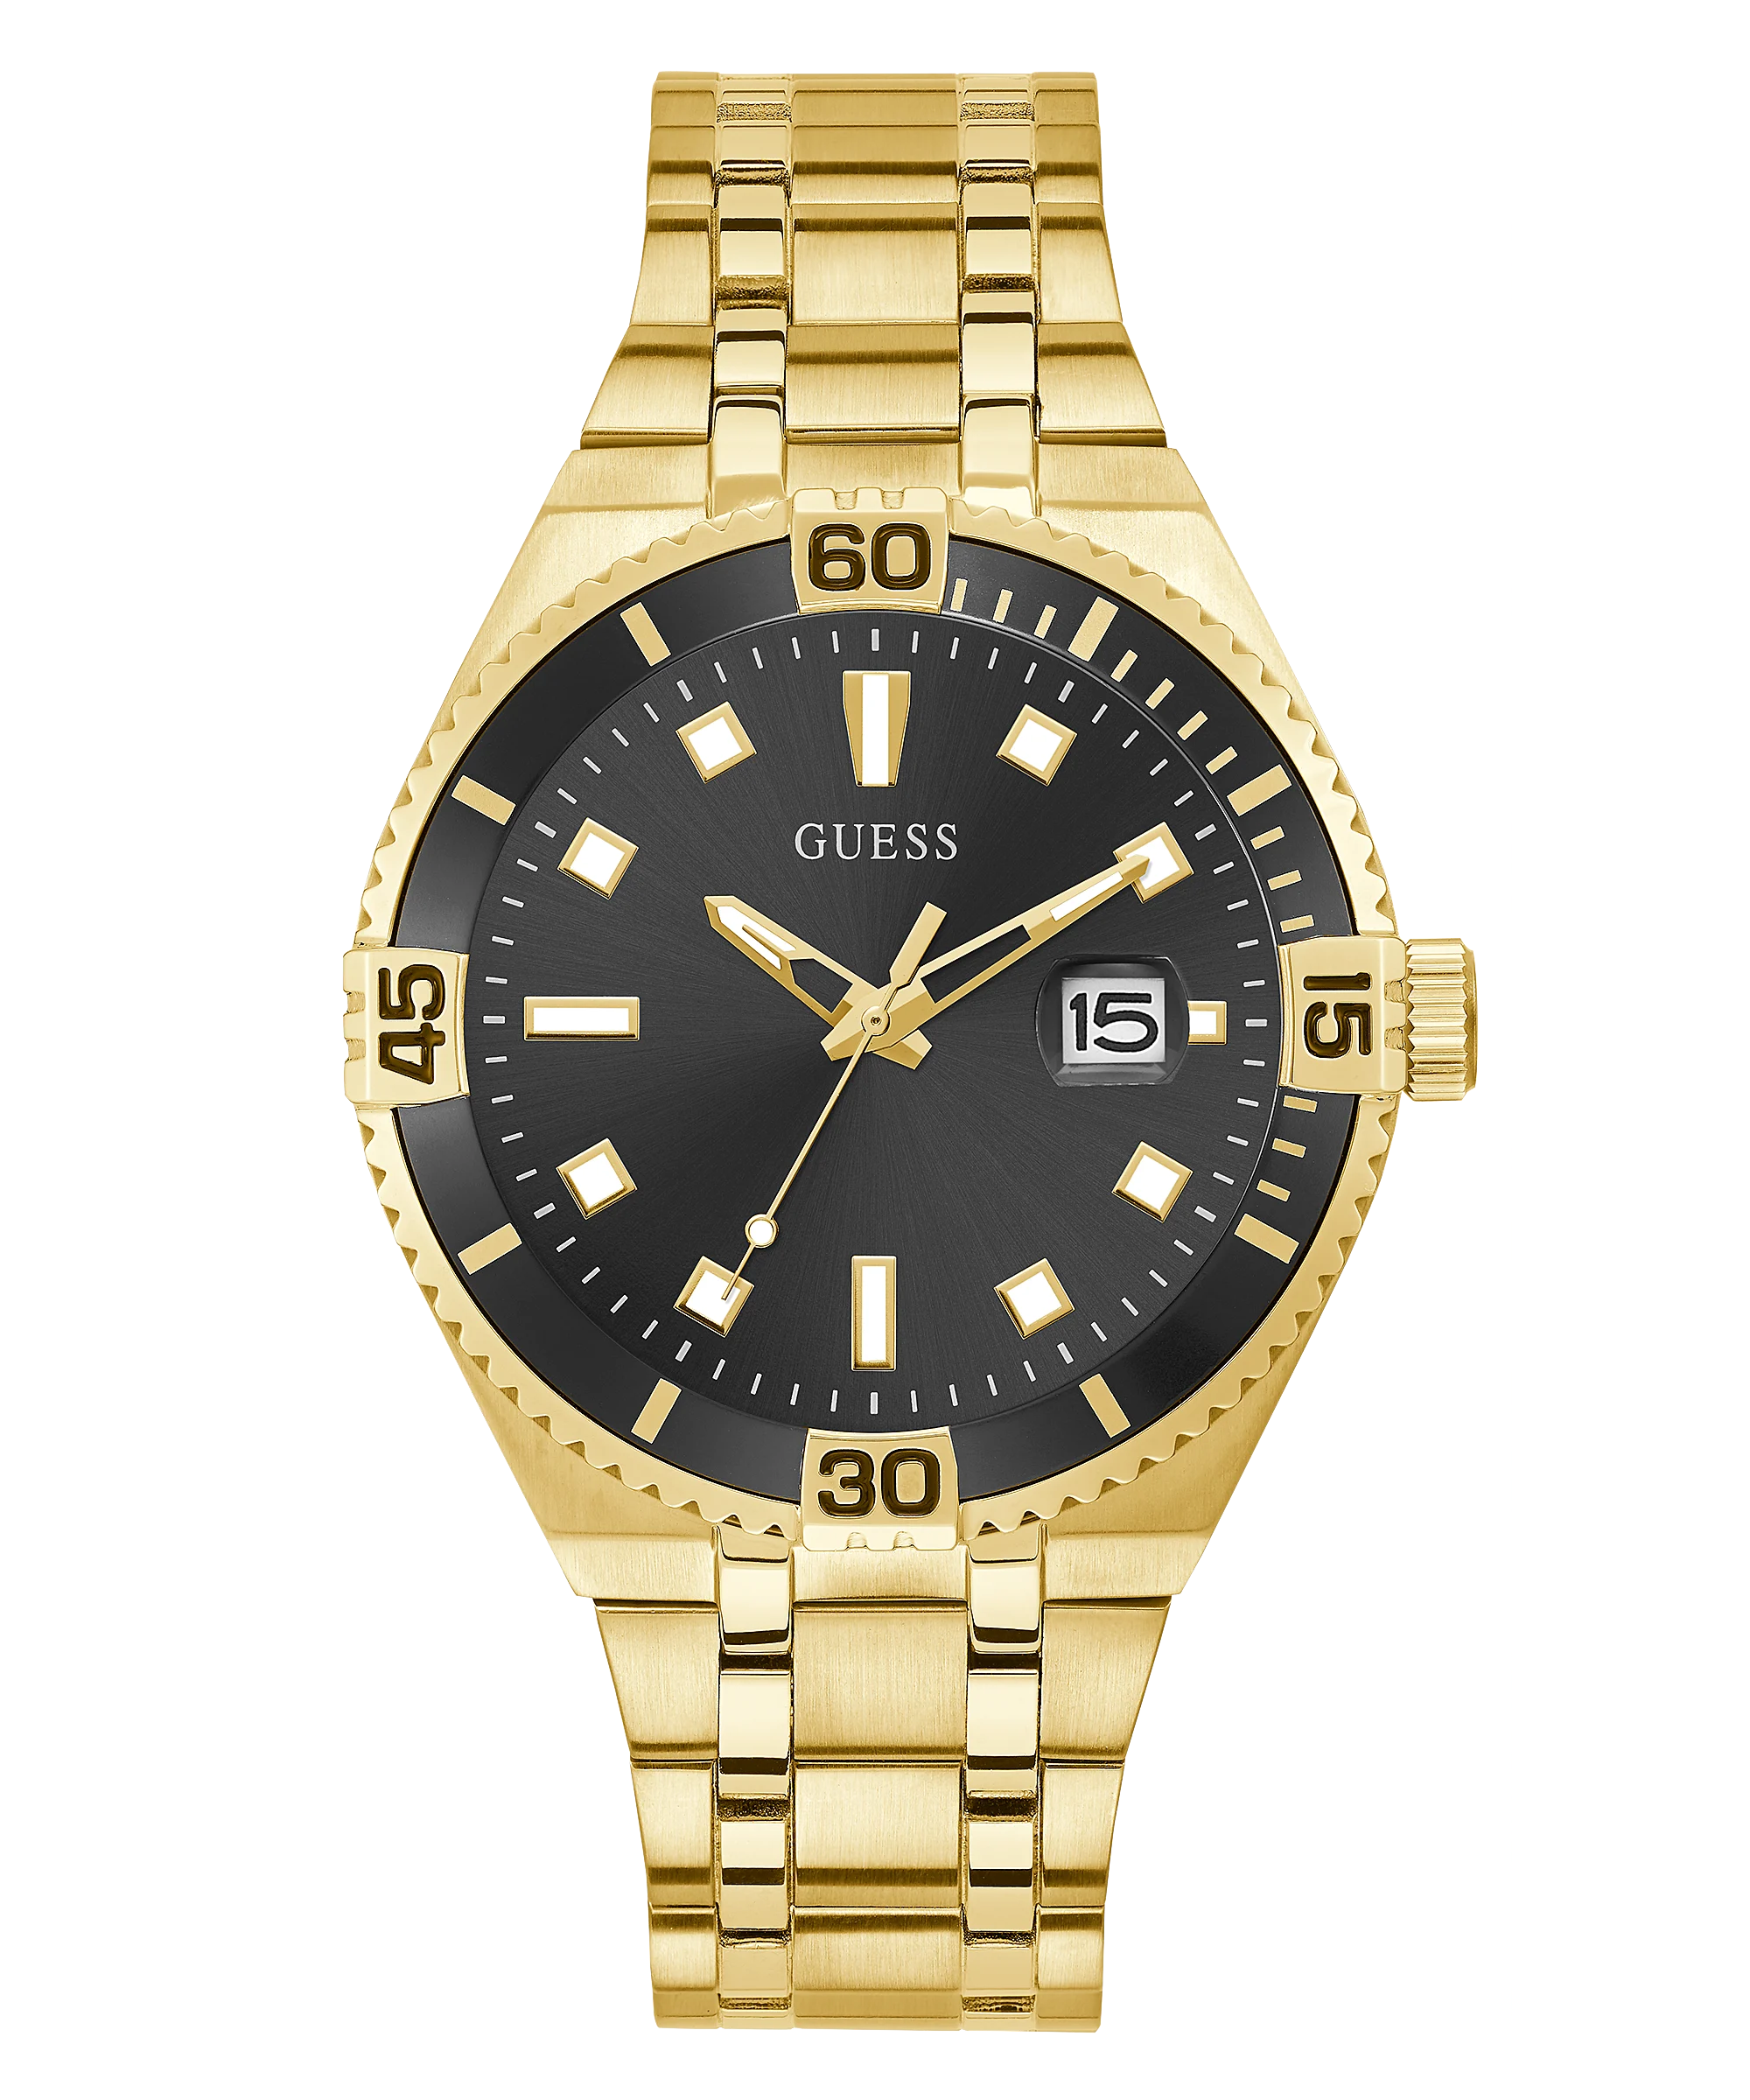 Guess GOLD TONE CASE GOLD TONE STAINLESS STEEL WATCH